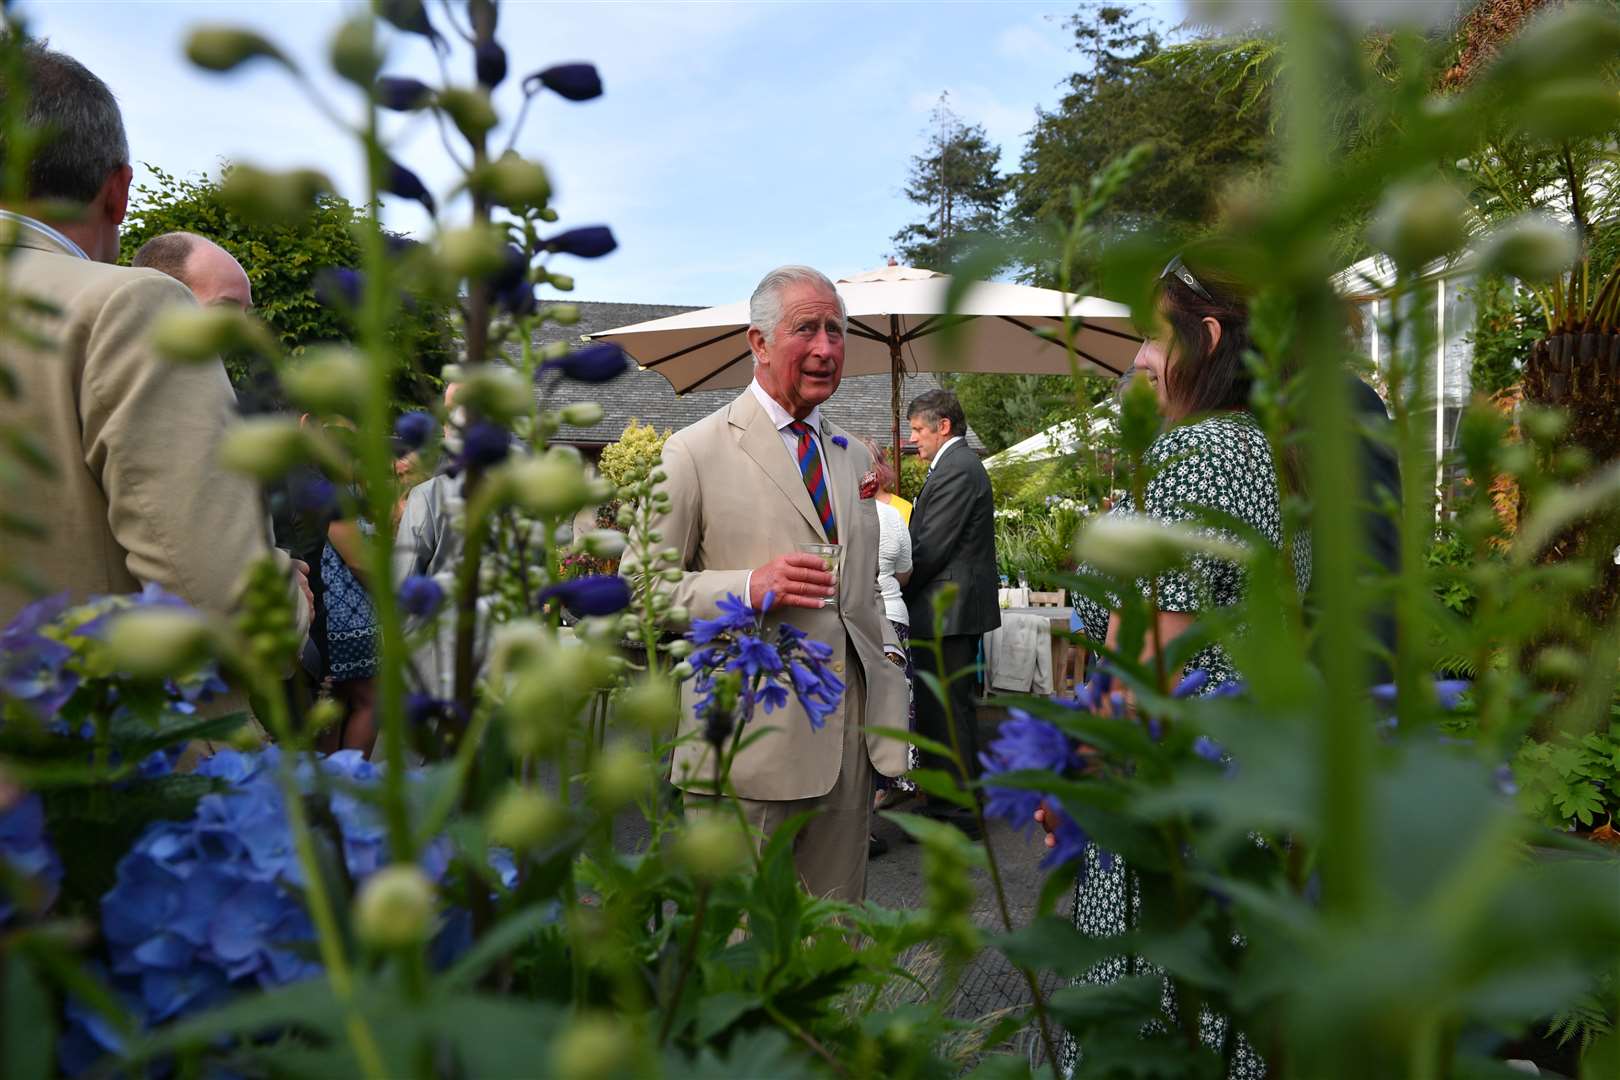 The Prince of Wales attending a reception to celebrate the 50th Anniversary of his chairmanship of the Duchy of Cornwall in 2019 (Ben Birchall/PA)